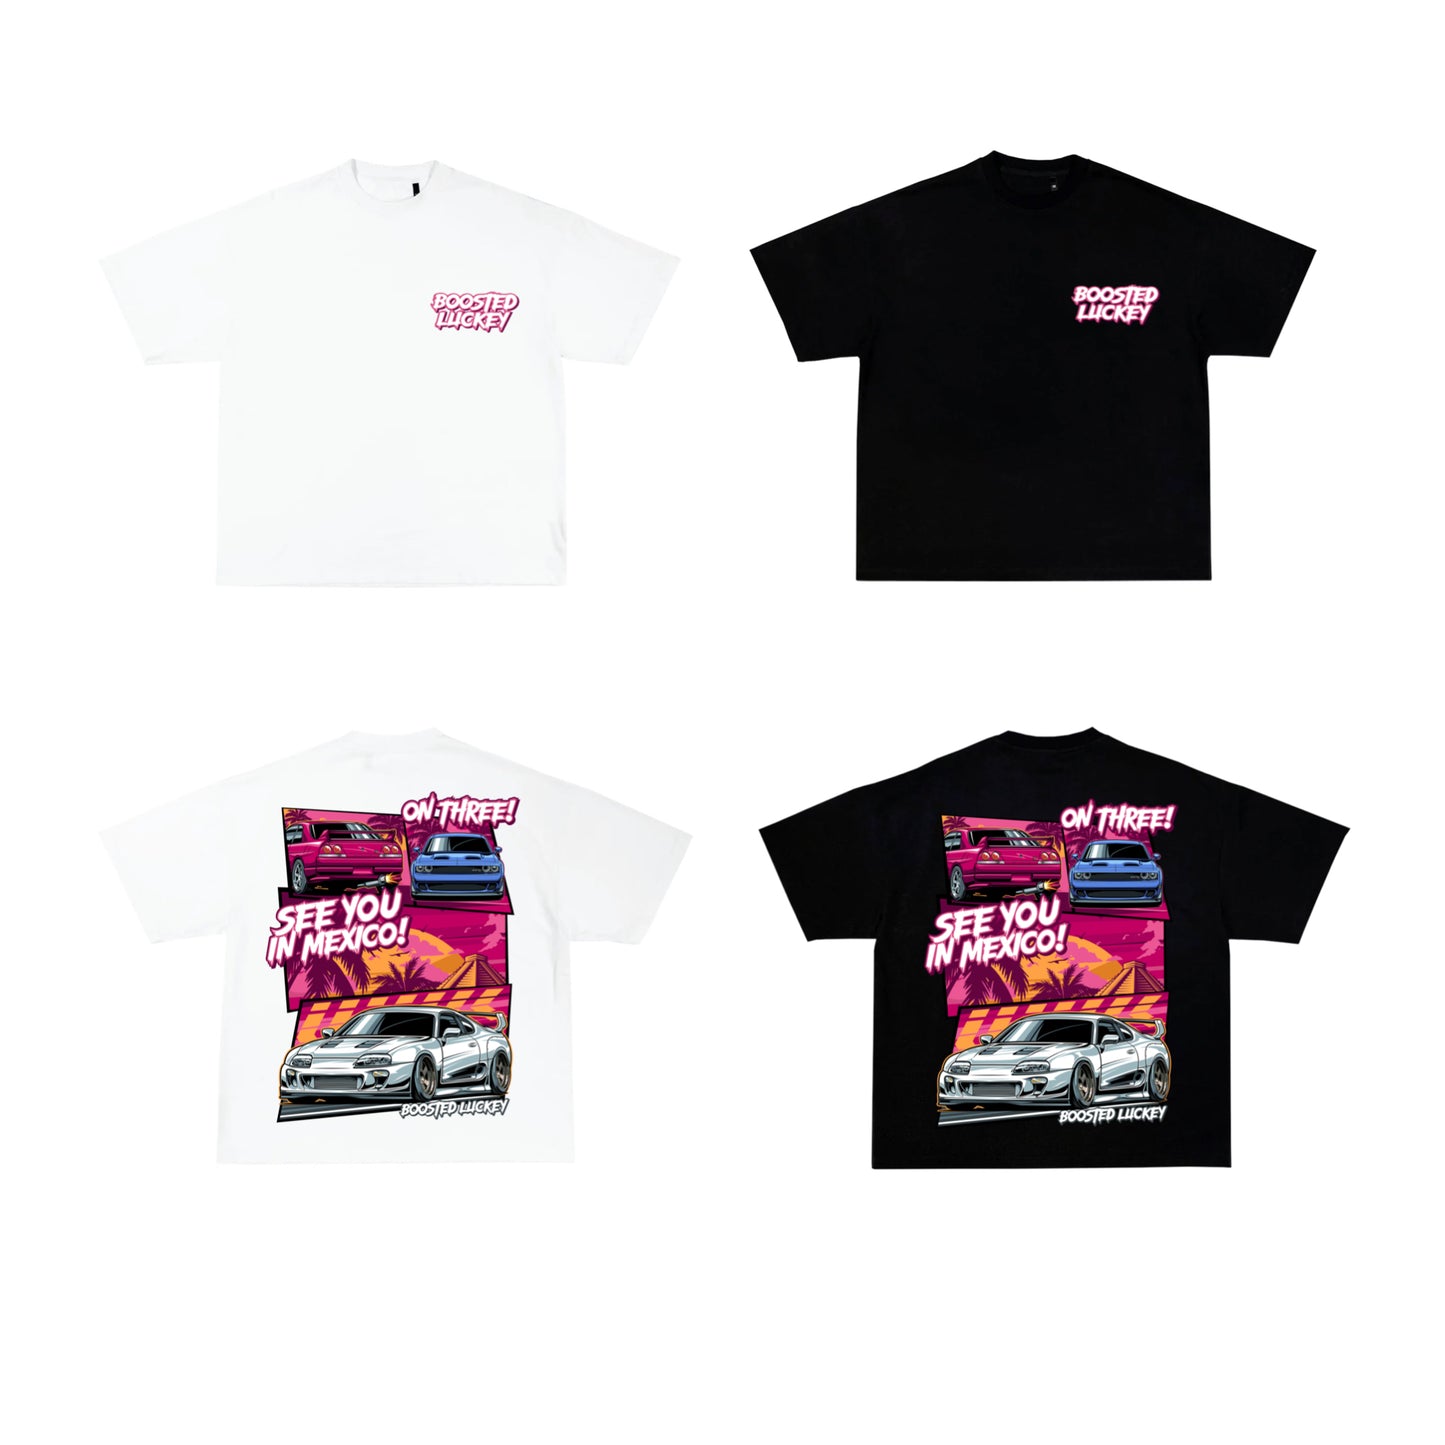 BoostedLuckey “Summer Time” T-Shirt - BOOSTED LUCKEY